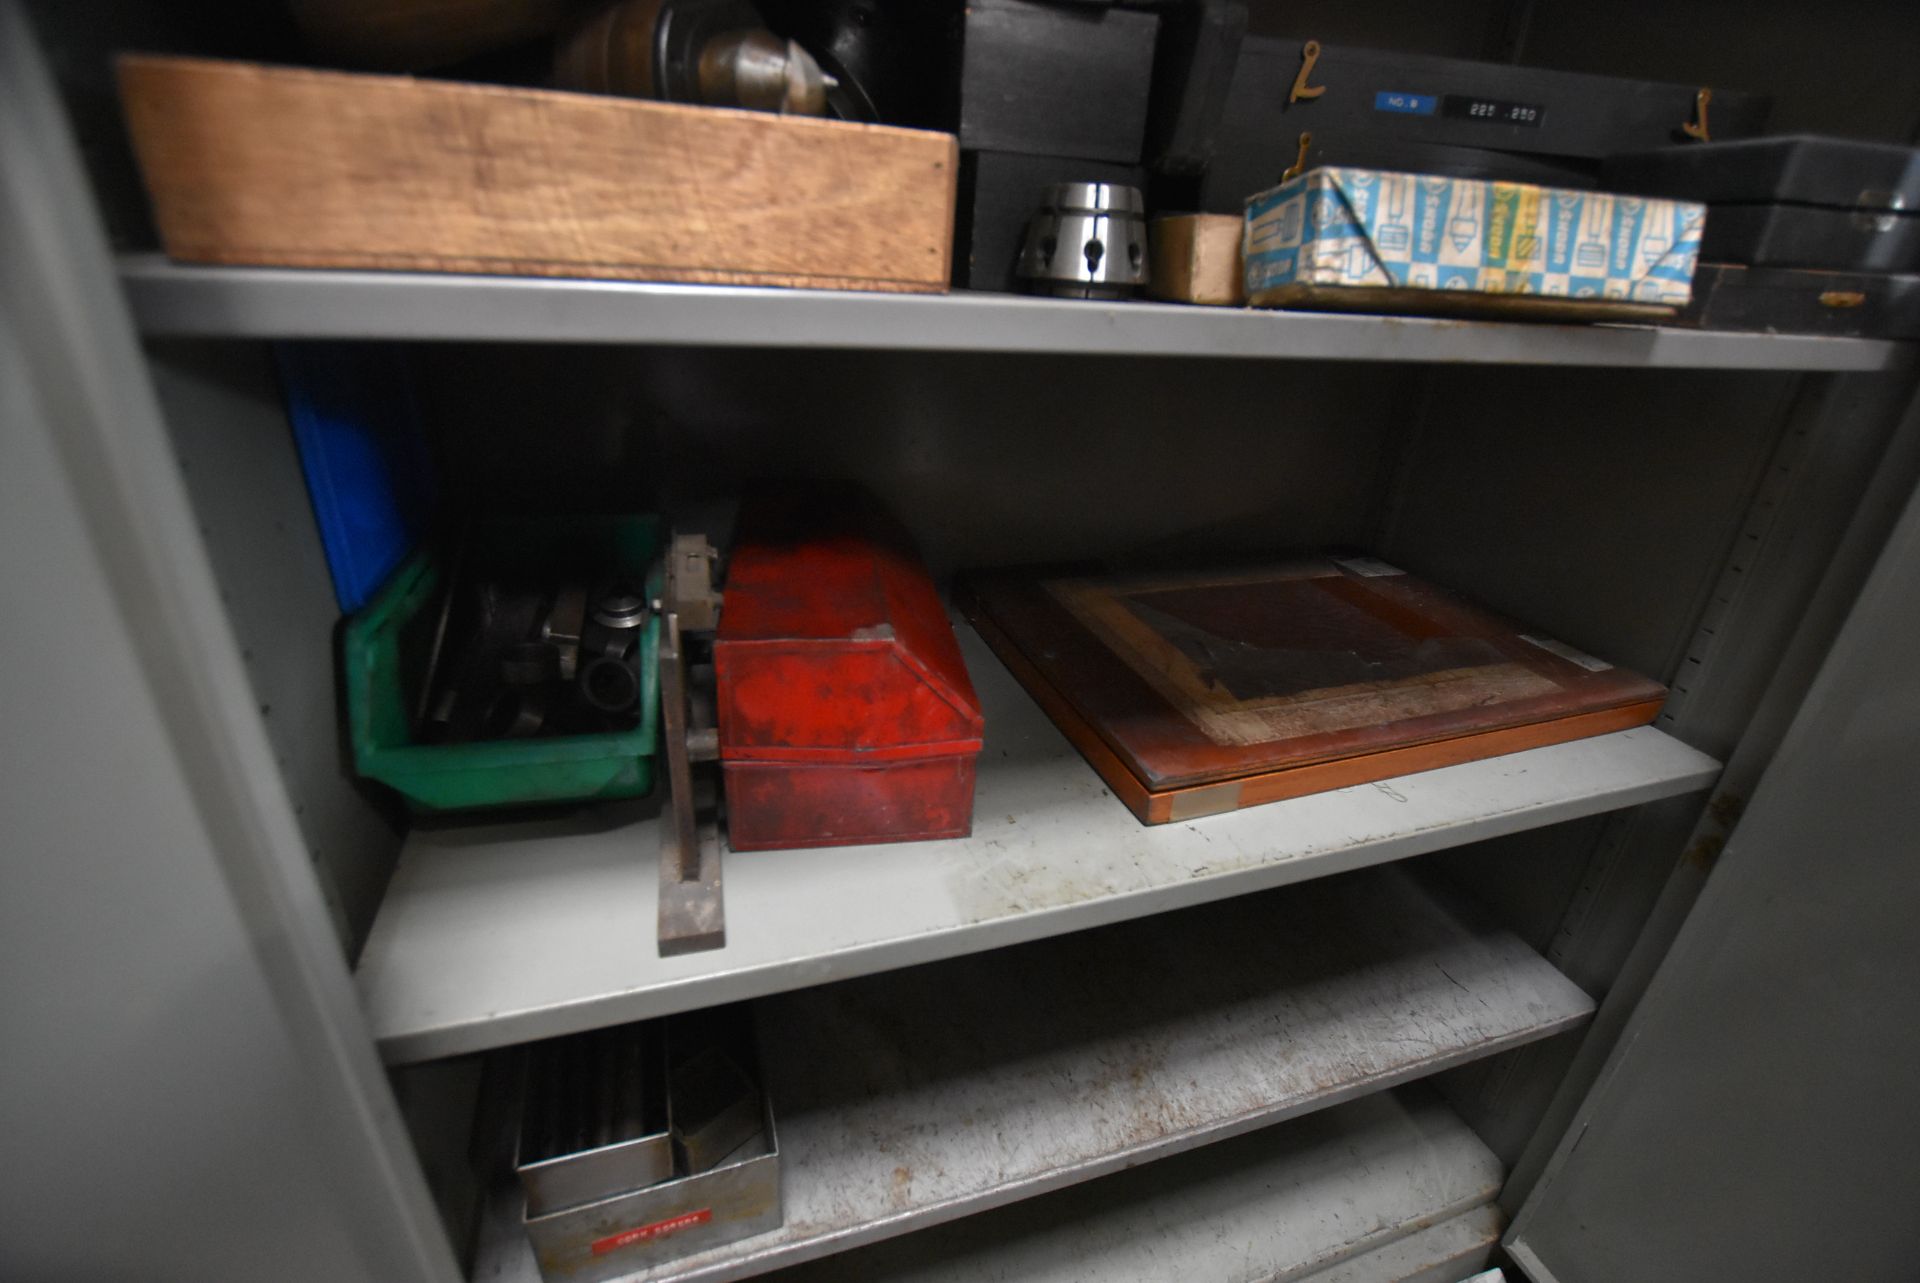 Double Door Steel Cabinet, with contents including inspection equipment, magnetic bases, micrometers - Image 6 of 8